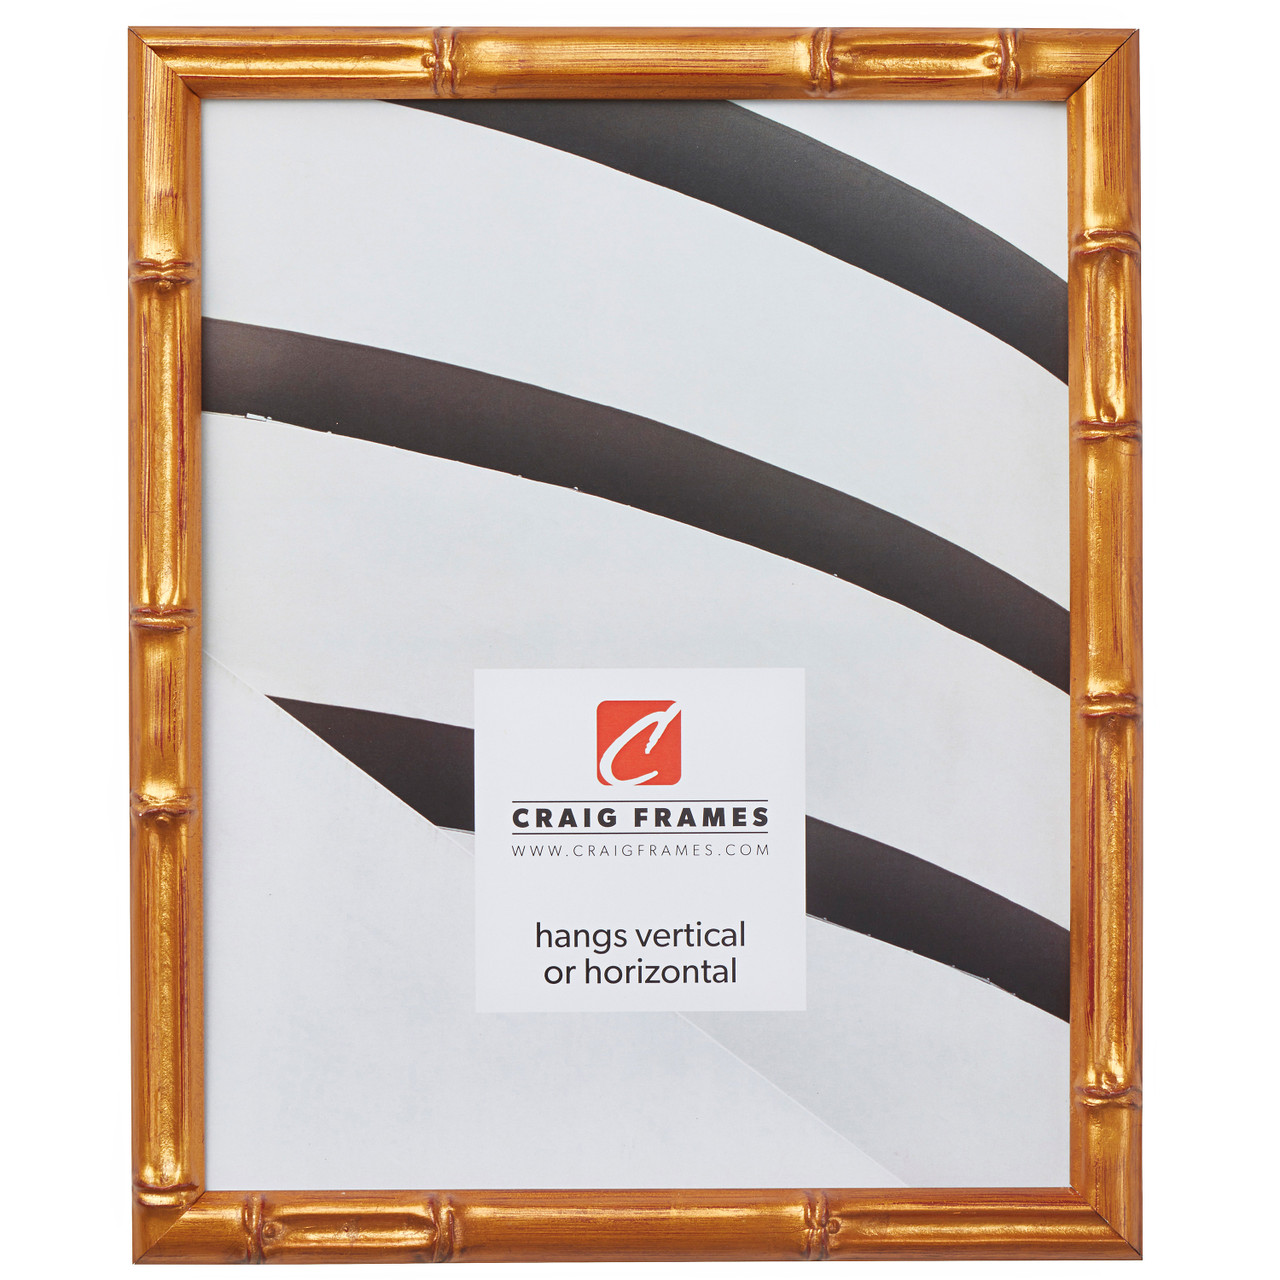 Shop Stylish Picture Frames for Every Space at Craig Frames - Your